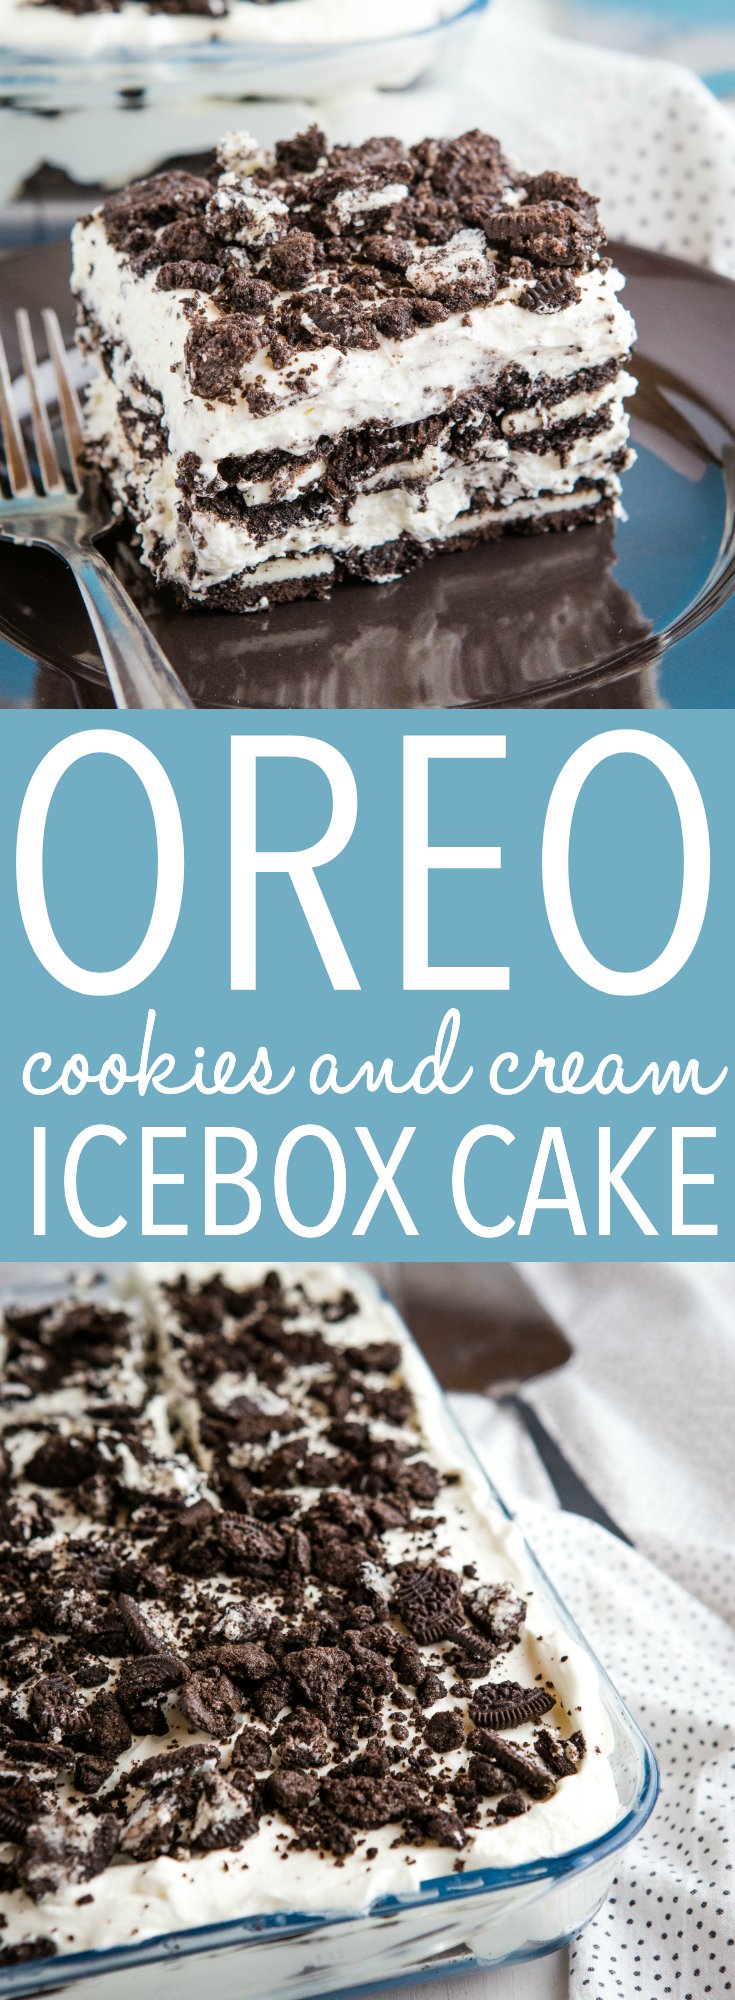 This Easy No Bake Cookies and Cream Oreo Icebox Cake is the perfect creamy no bake summer dessert! Only 4 ingredients required! Recipe from thebusybaker.ca! #oreo #iceboxcake #nobake #cheesecake #dessert #sweet #barbecue #poolparty #summer #summerdessert via @busybakerblog